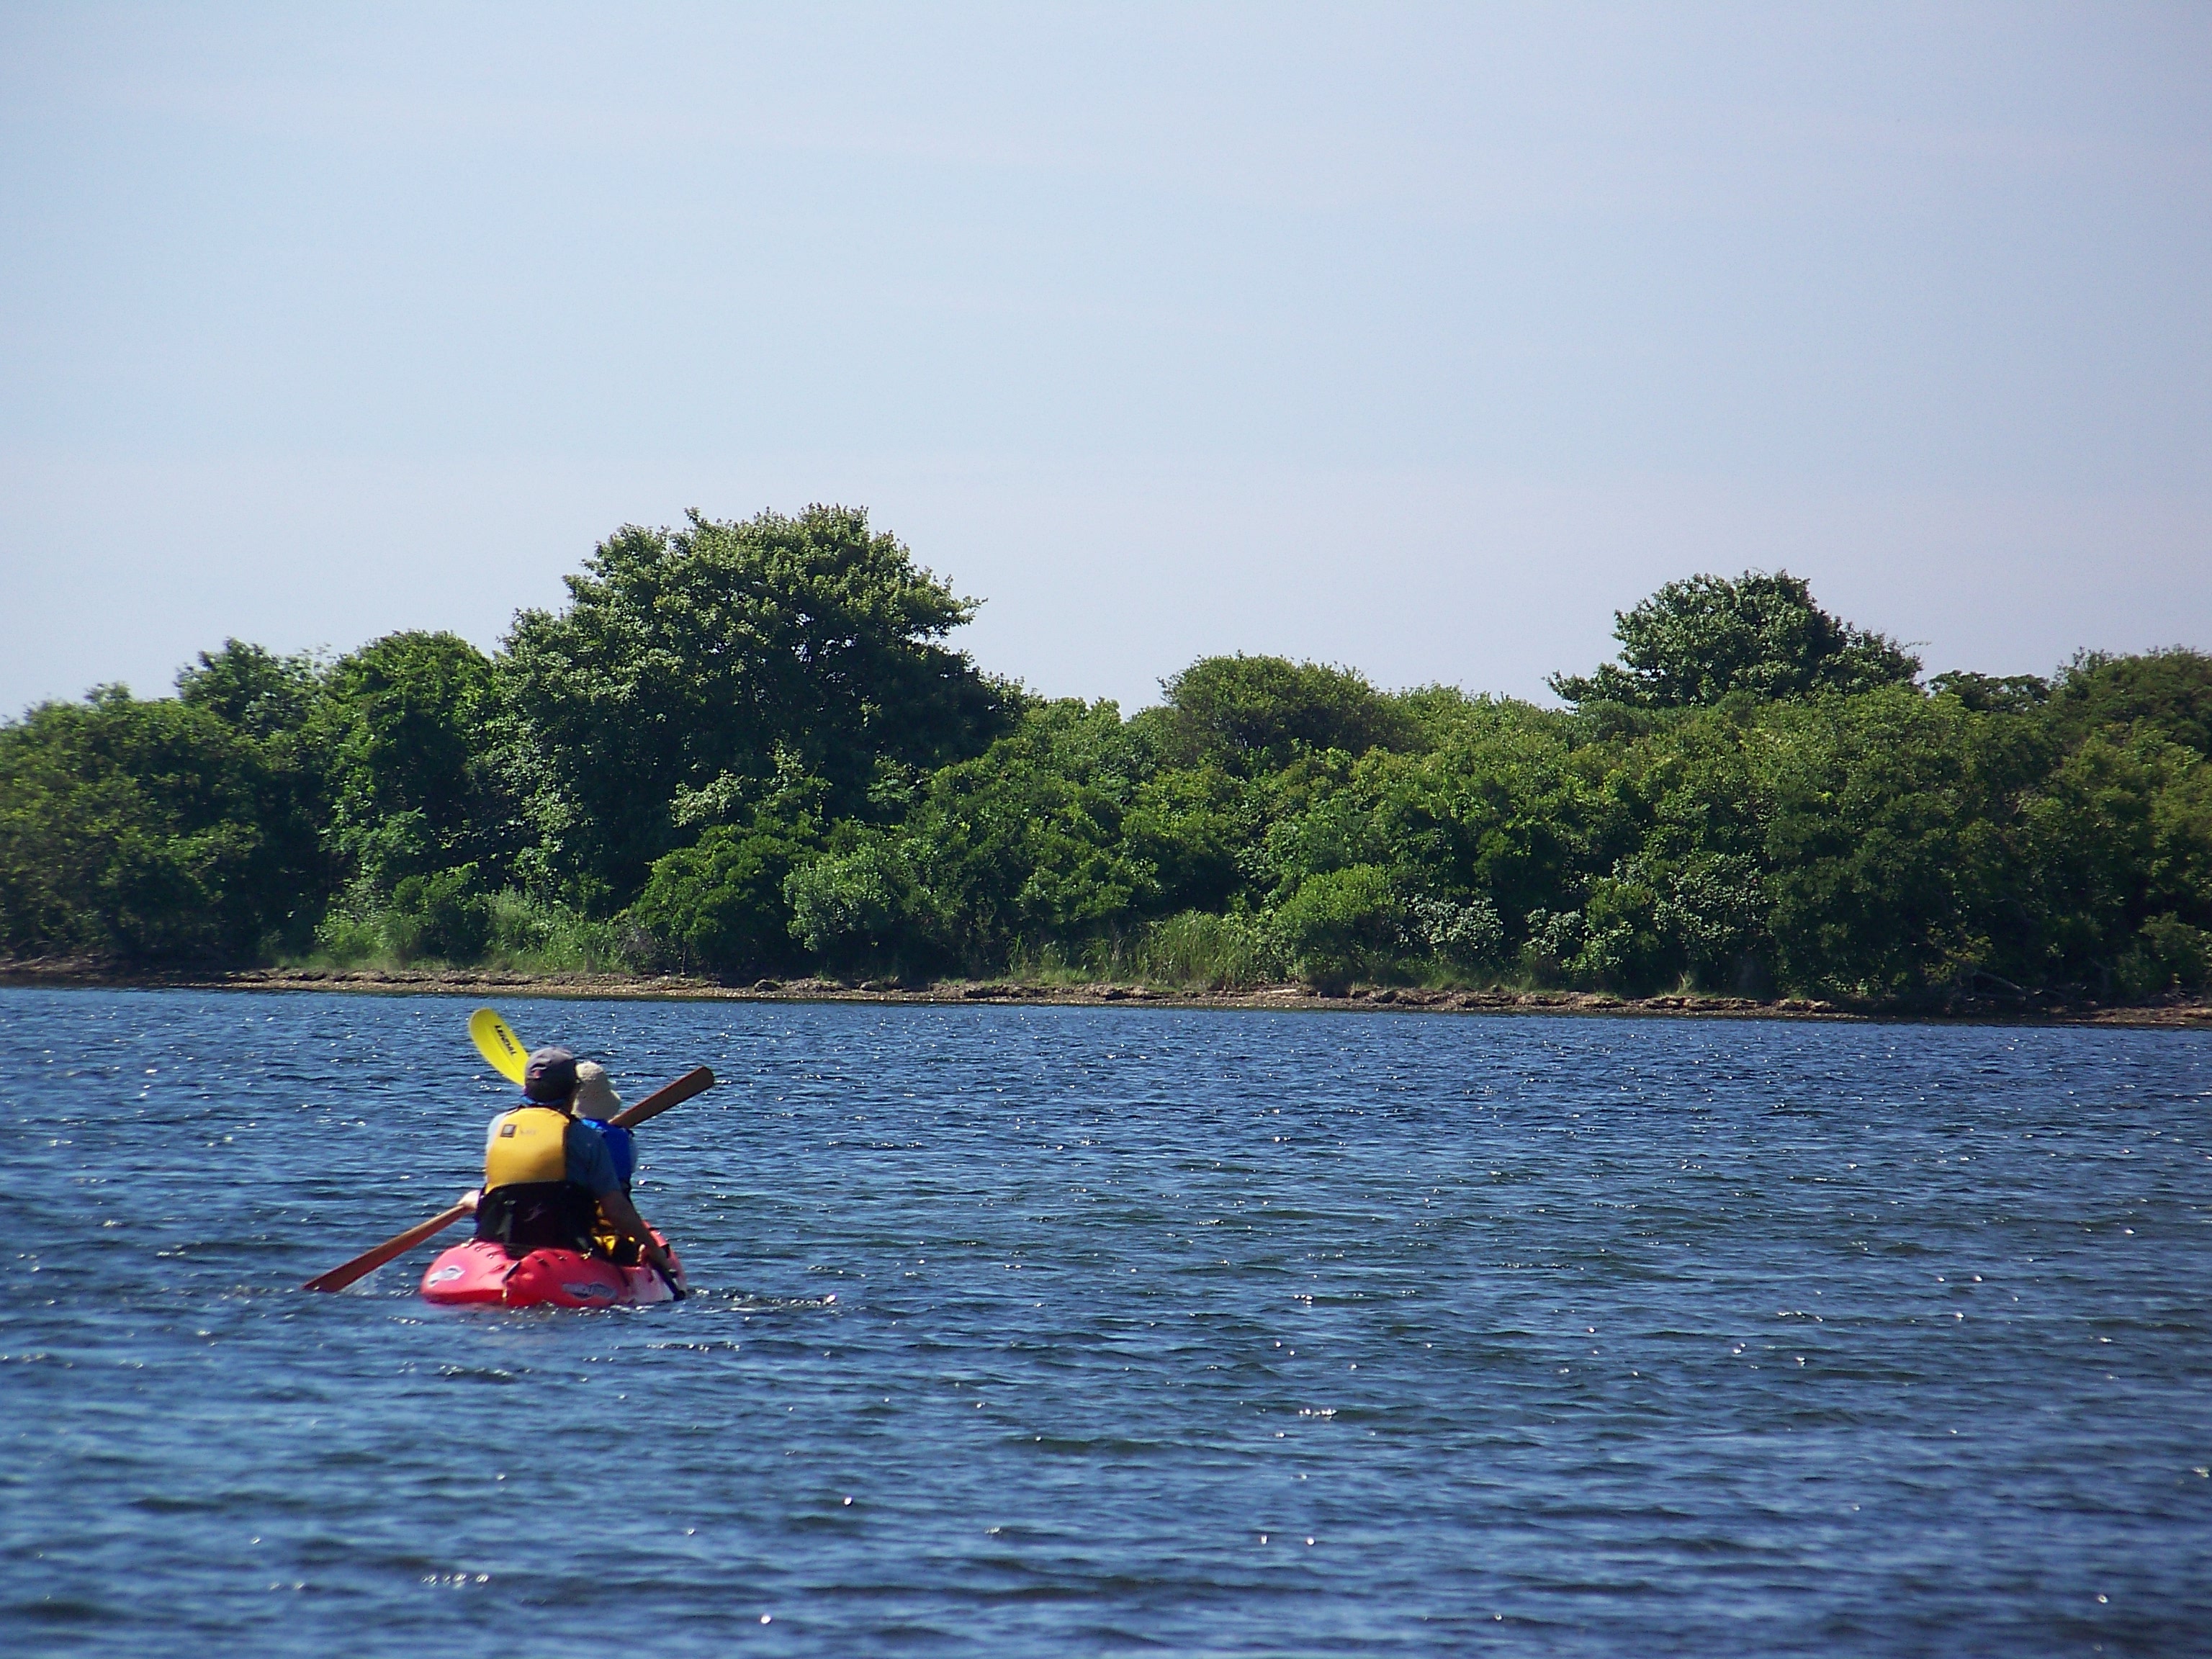 Kayakers in a large body of water lined with trees